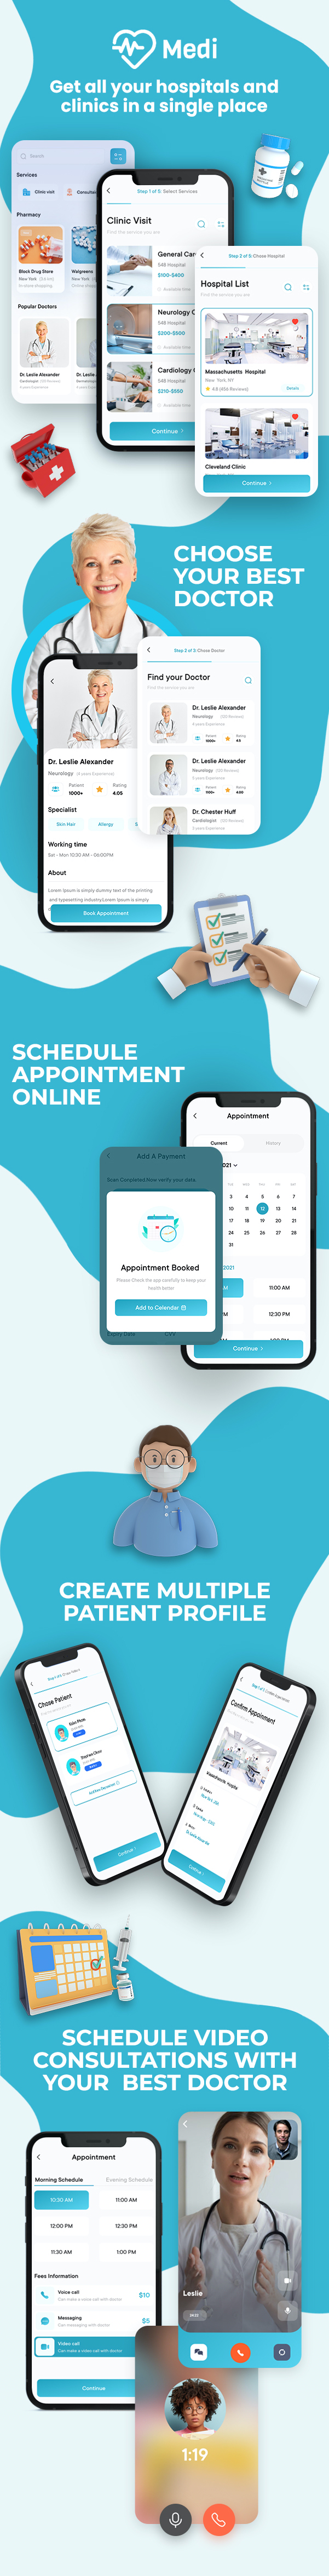 Medi - Doctor Appointment Booking Flutter App UI Template - 1